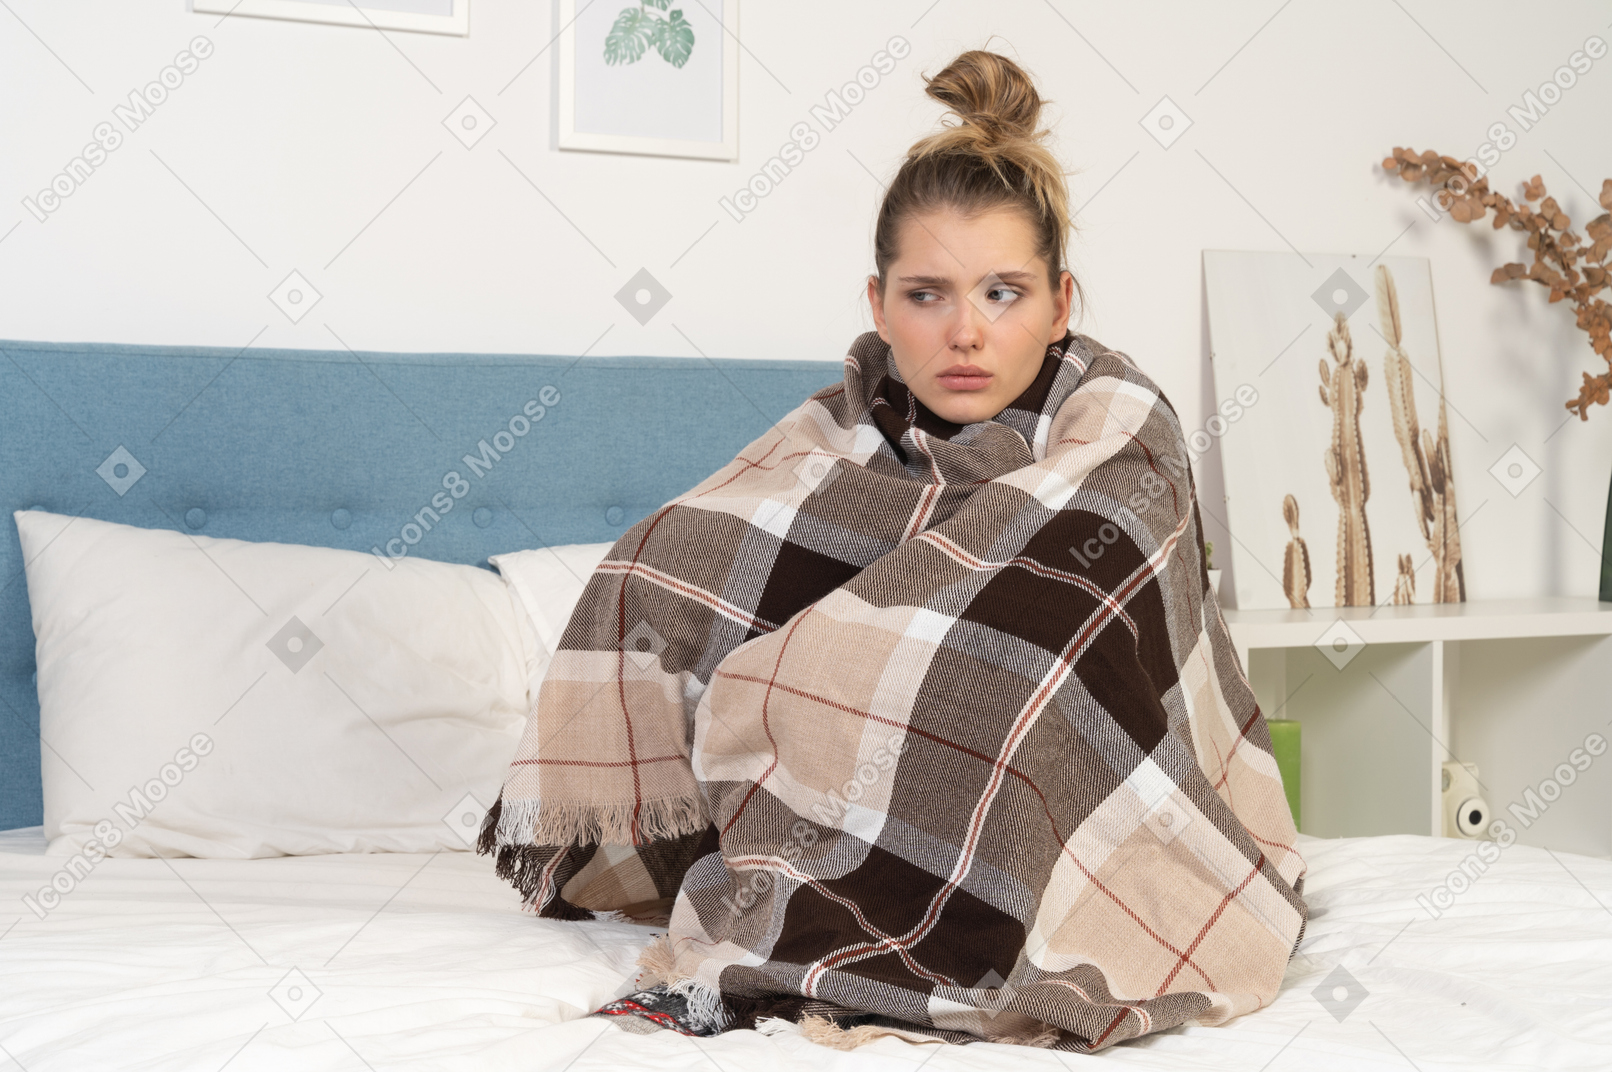 Front view of an ill young lady wrapped in checked blanket in bed